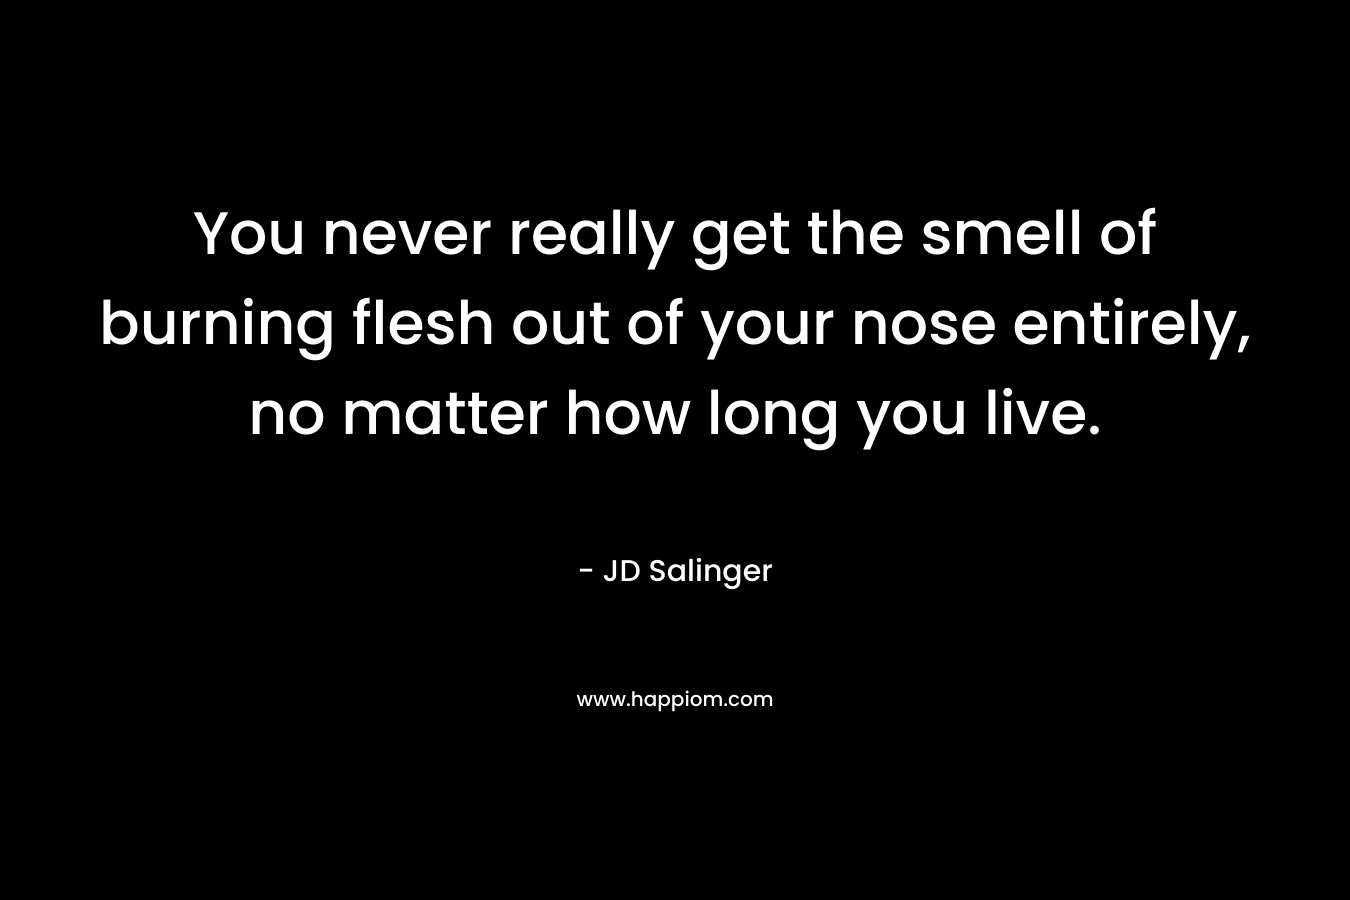 You never really get the smell of burning flesh out of your nose entirely, no matter how long you live. – JD Salinger